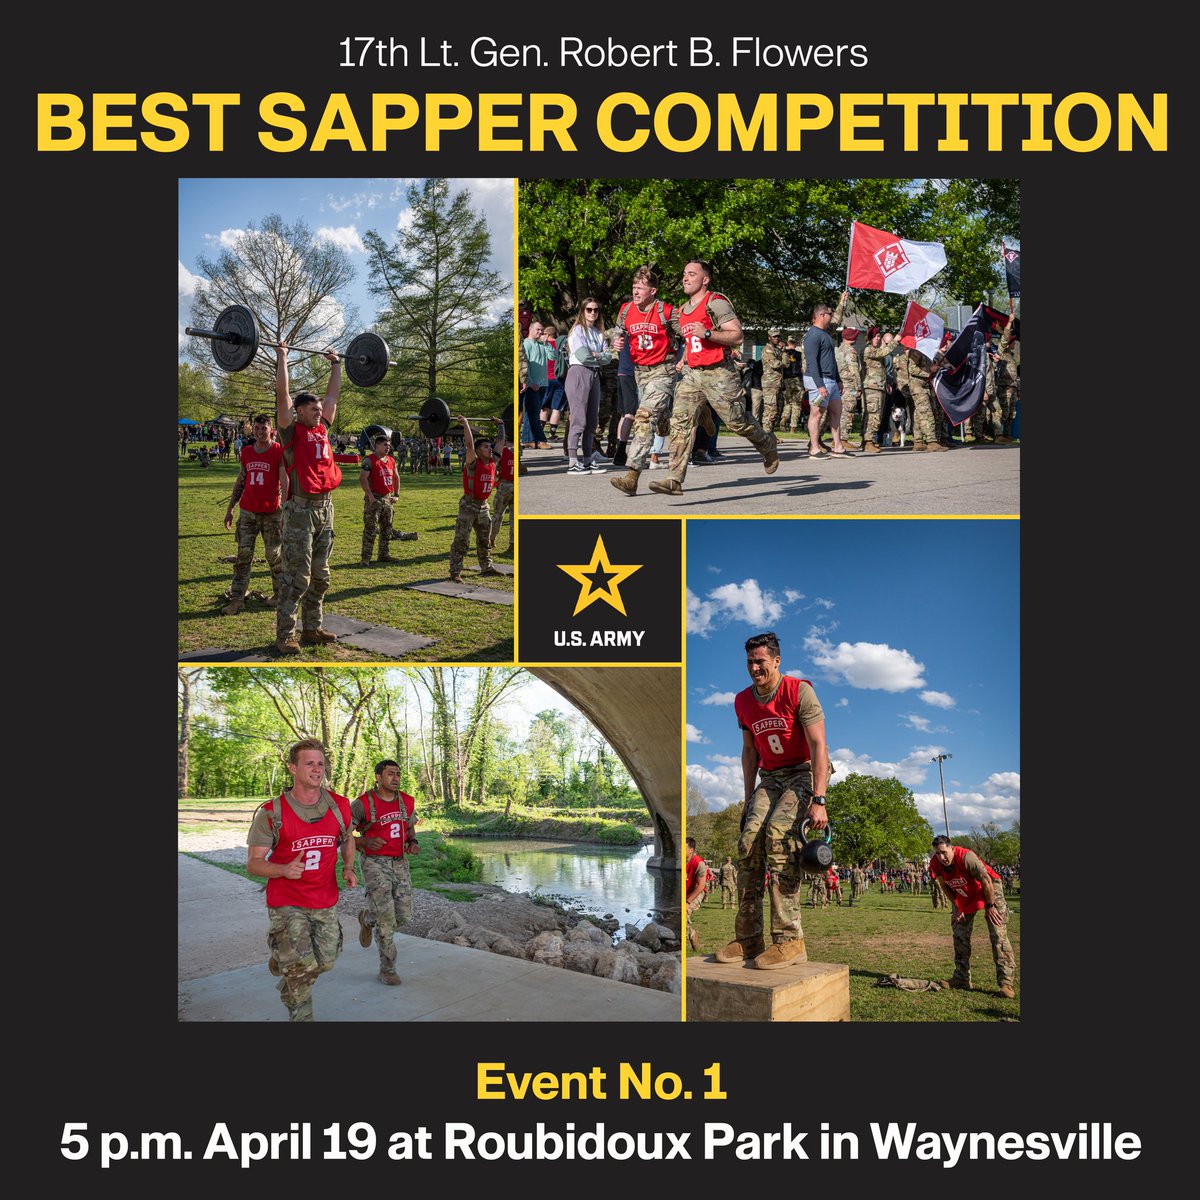 Join us at 5 p.m., today at the Roubidoux Park in Waynesville to help kick off this year's #BestSapper Competition.

#BSC24 #SLTW #earntheright